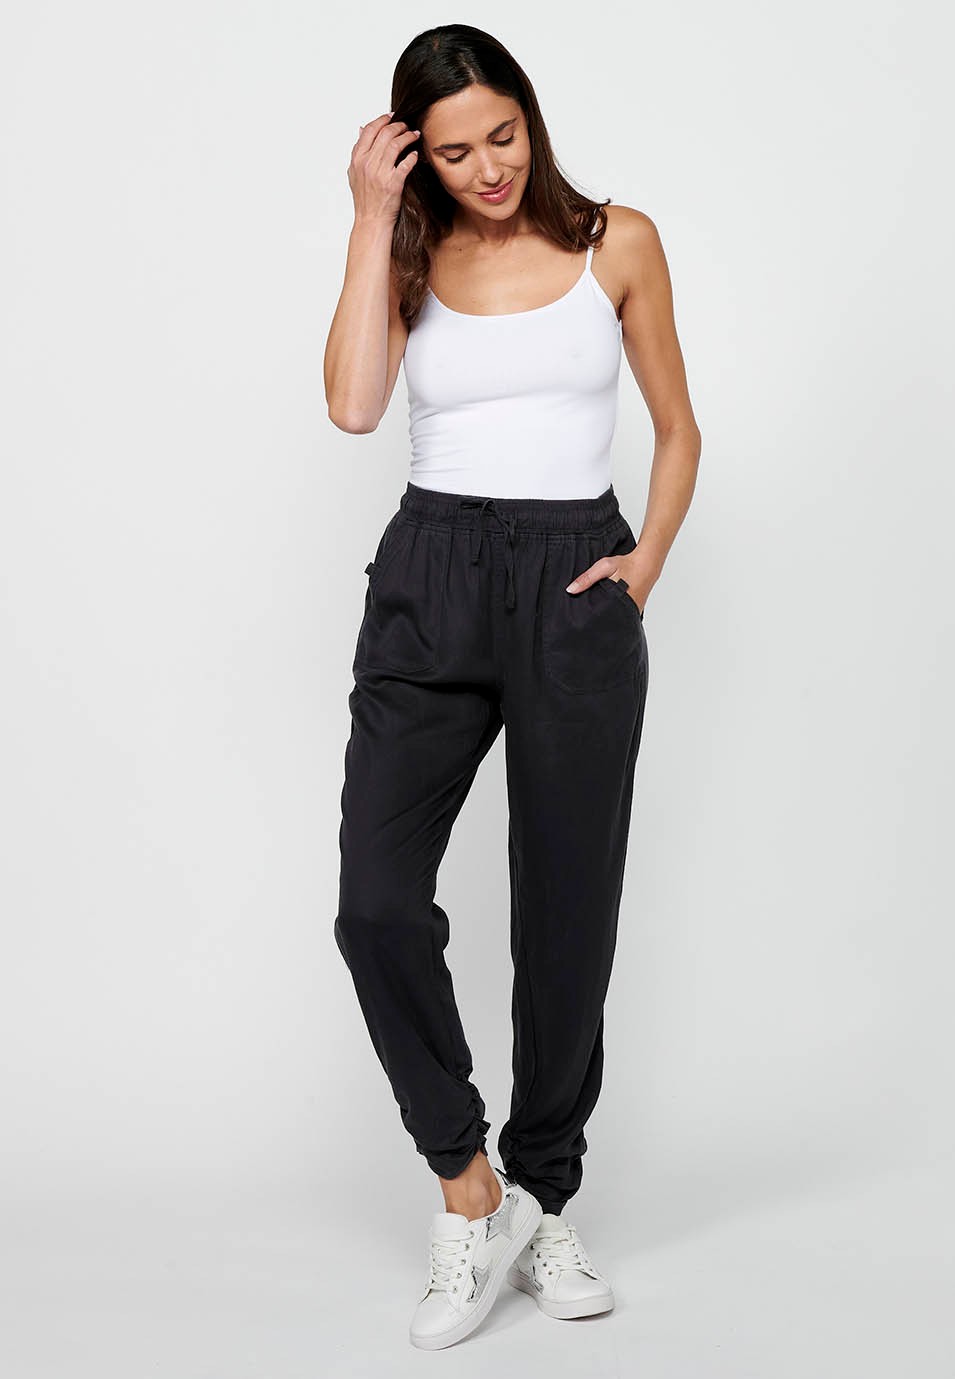 Long jogger pants with curled finish and rubberized waist with four pockets, two at the back with flap in Black for Women